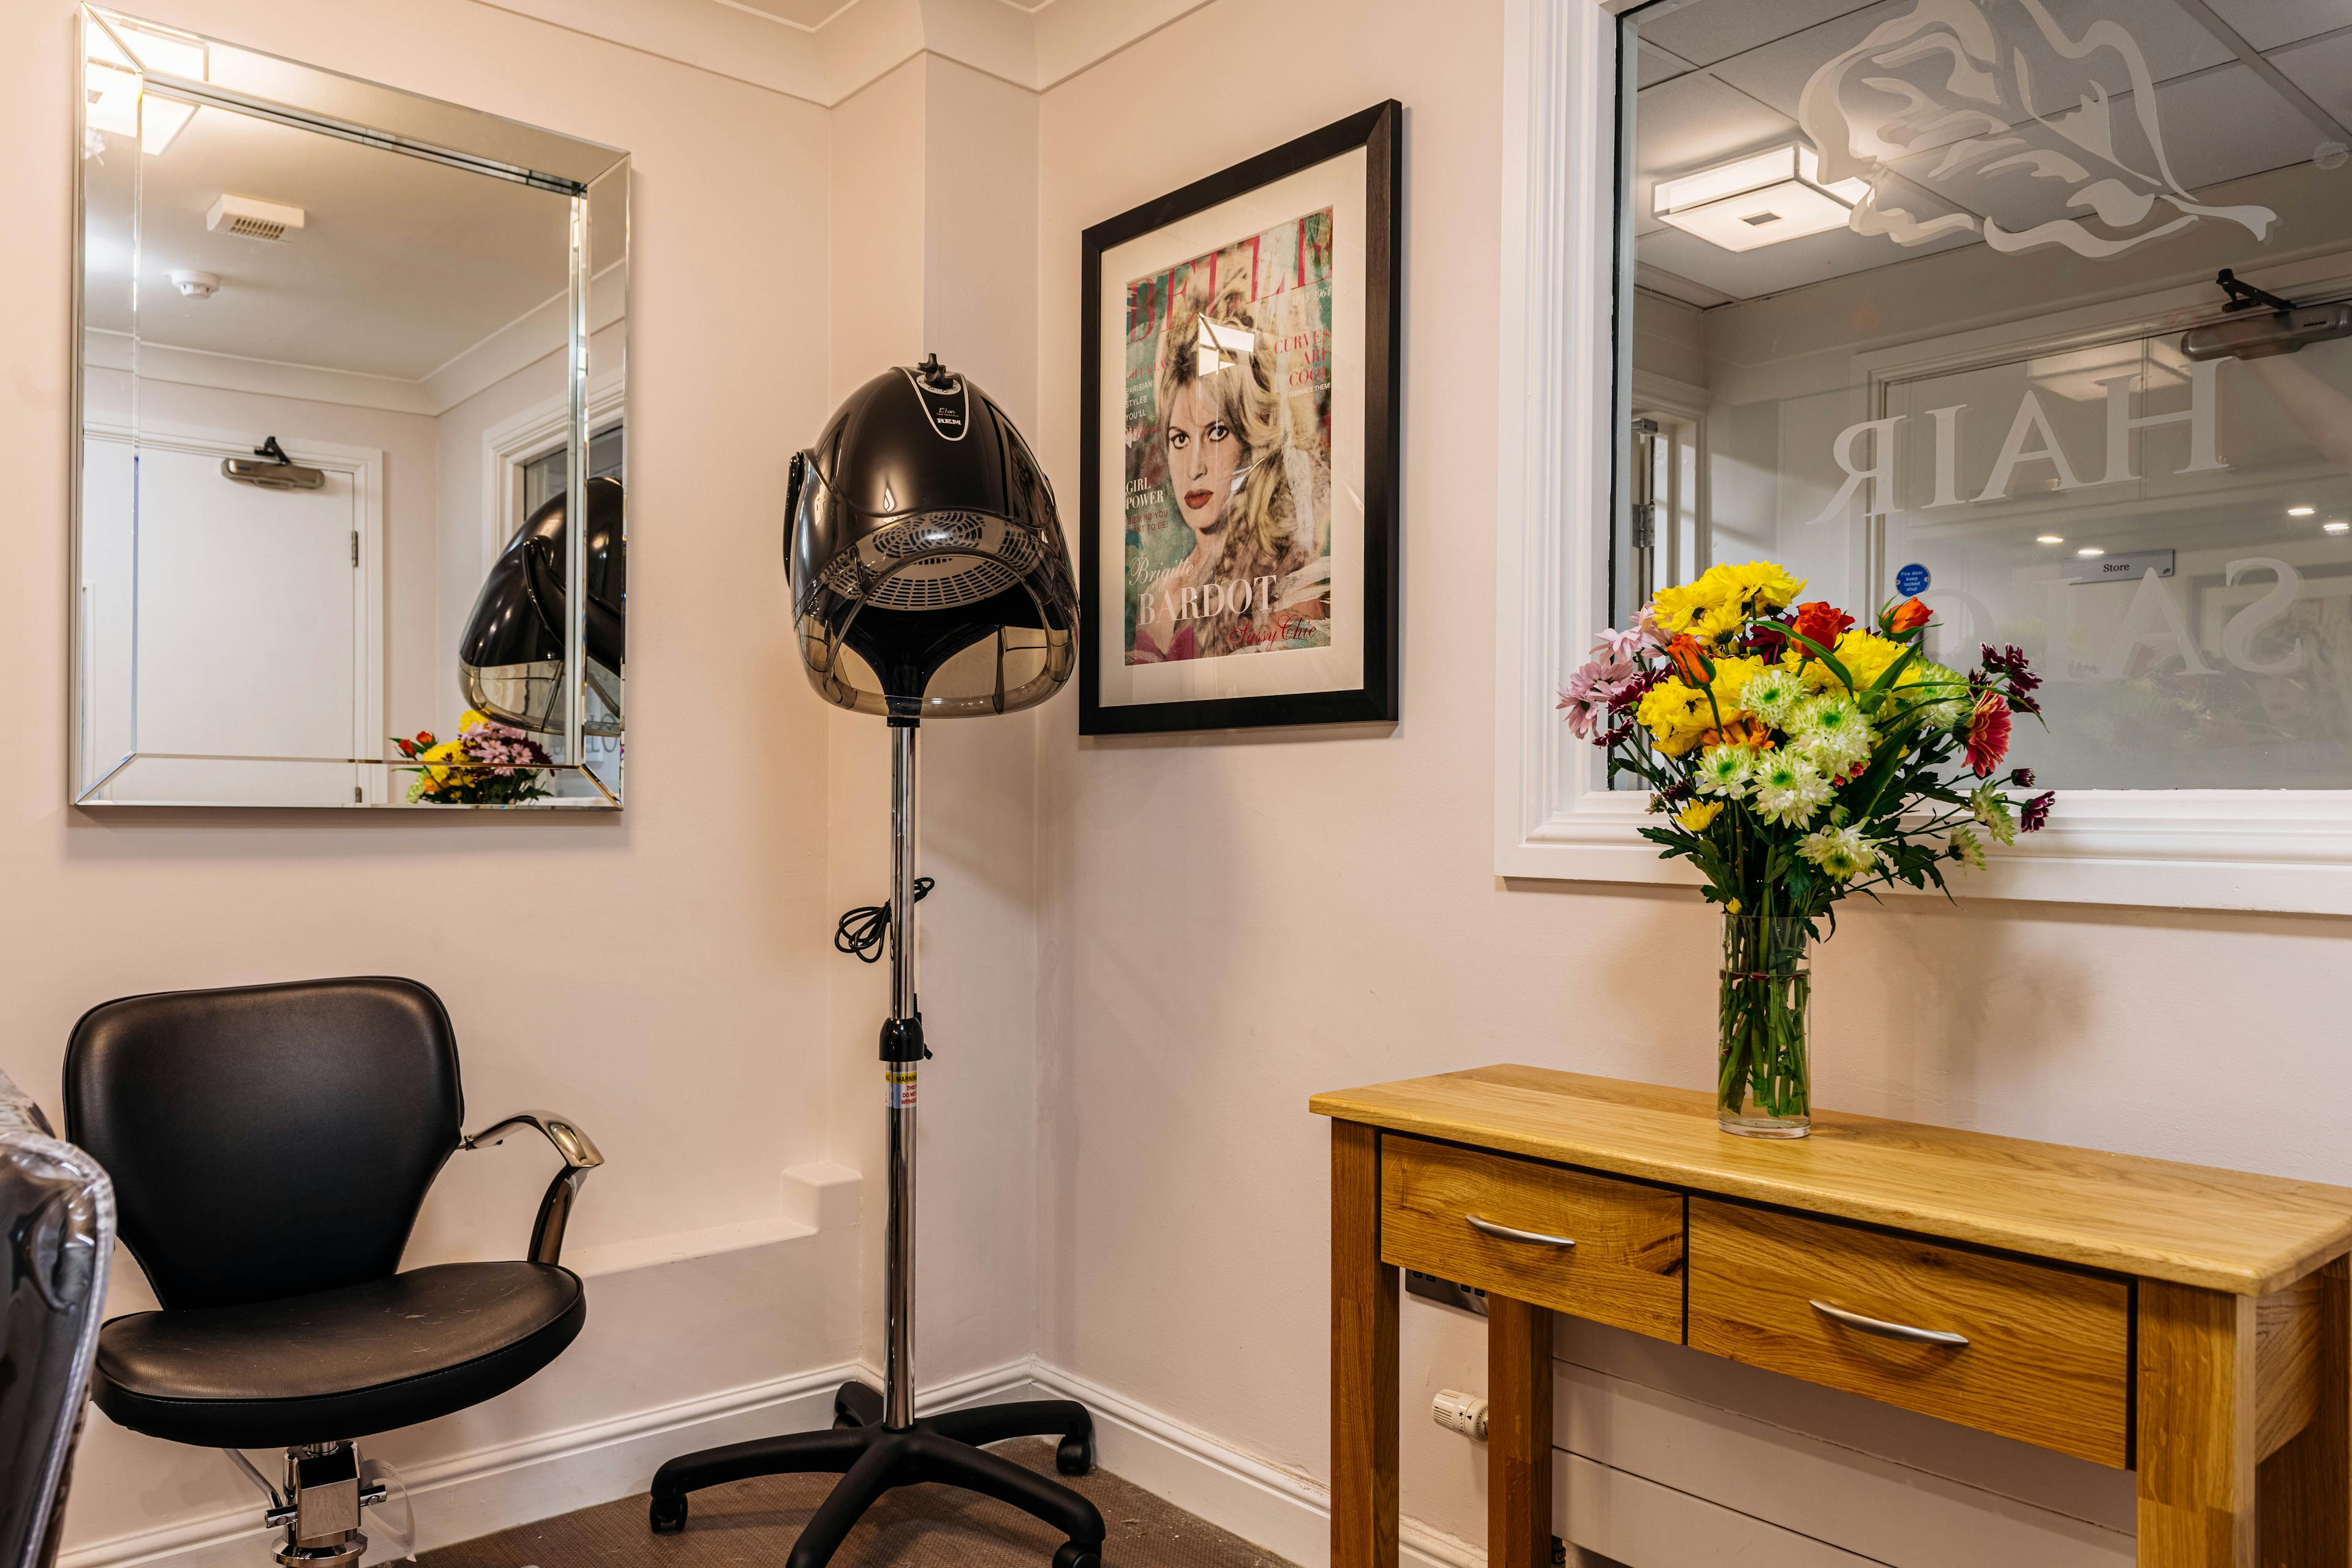 Hair Salon of Lawton Rise Care Home in Stoke-on-Trent, Staffordshire